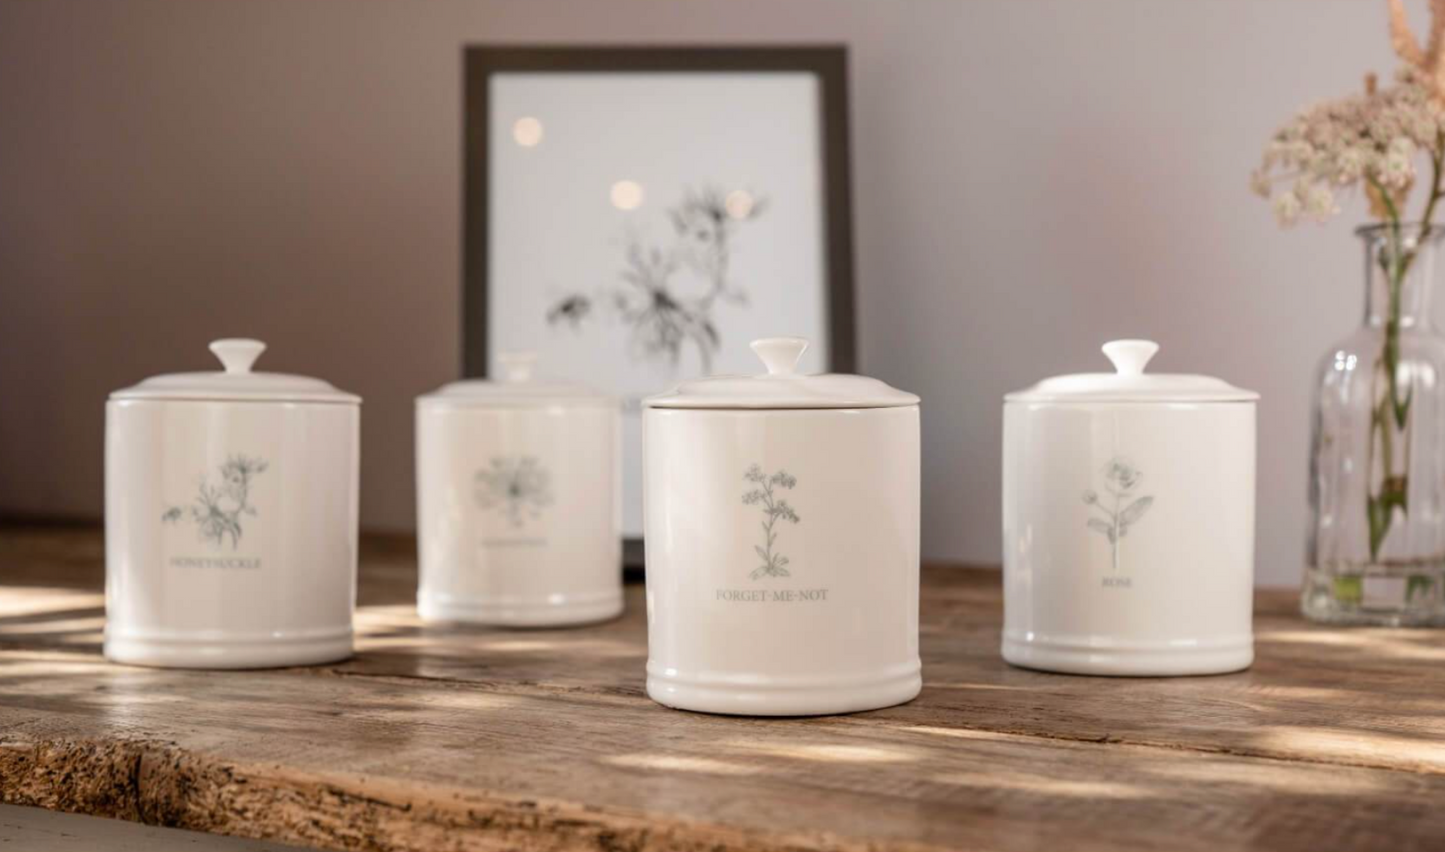 Mary Berry English Garden Collection Tea Canister, Honeysuckle